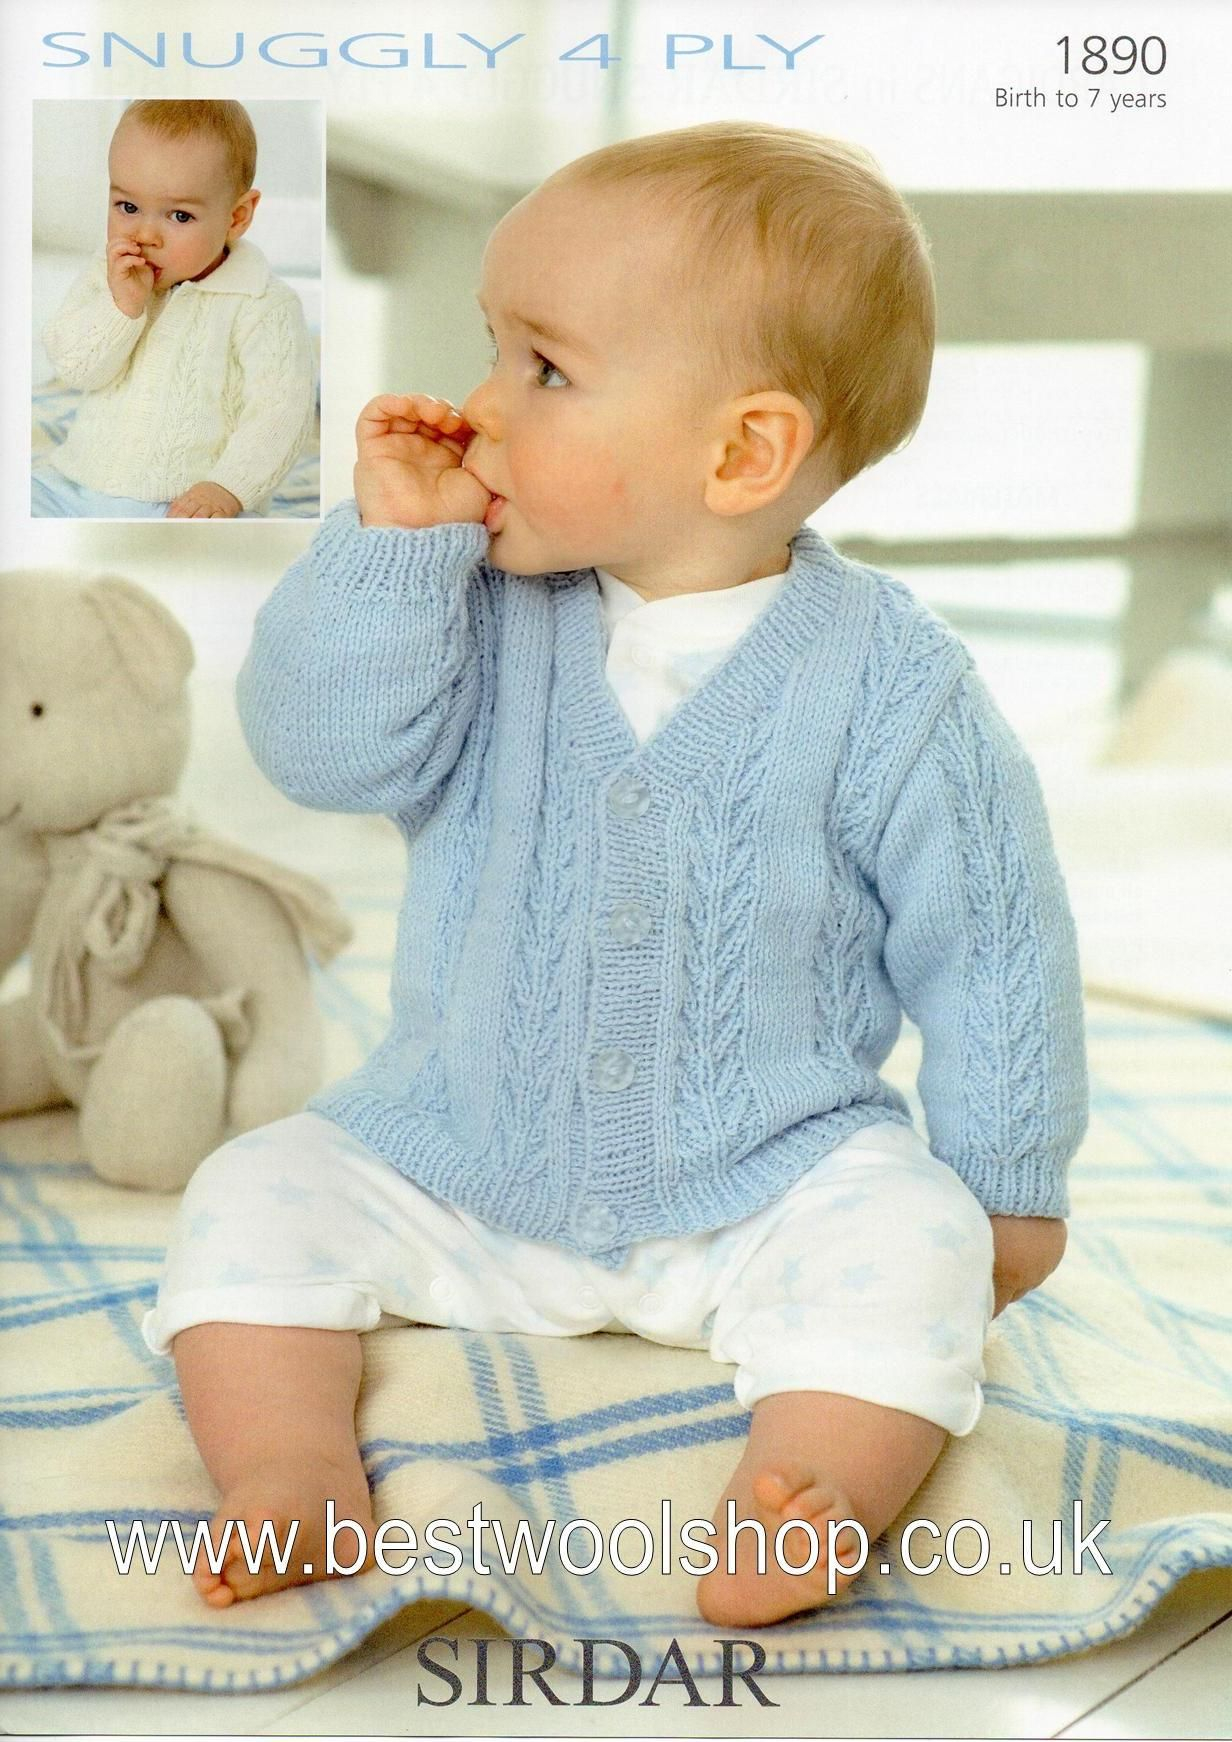 Sirdar Snuggly Knitting Patterns 1890 Sirdar Snuggly 4 Ply V Neck Collared Cardigan Knitting Pattern To Fit 0 To 7 Years